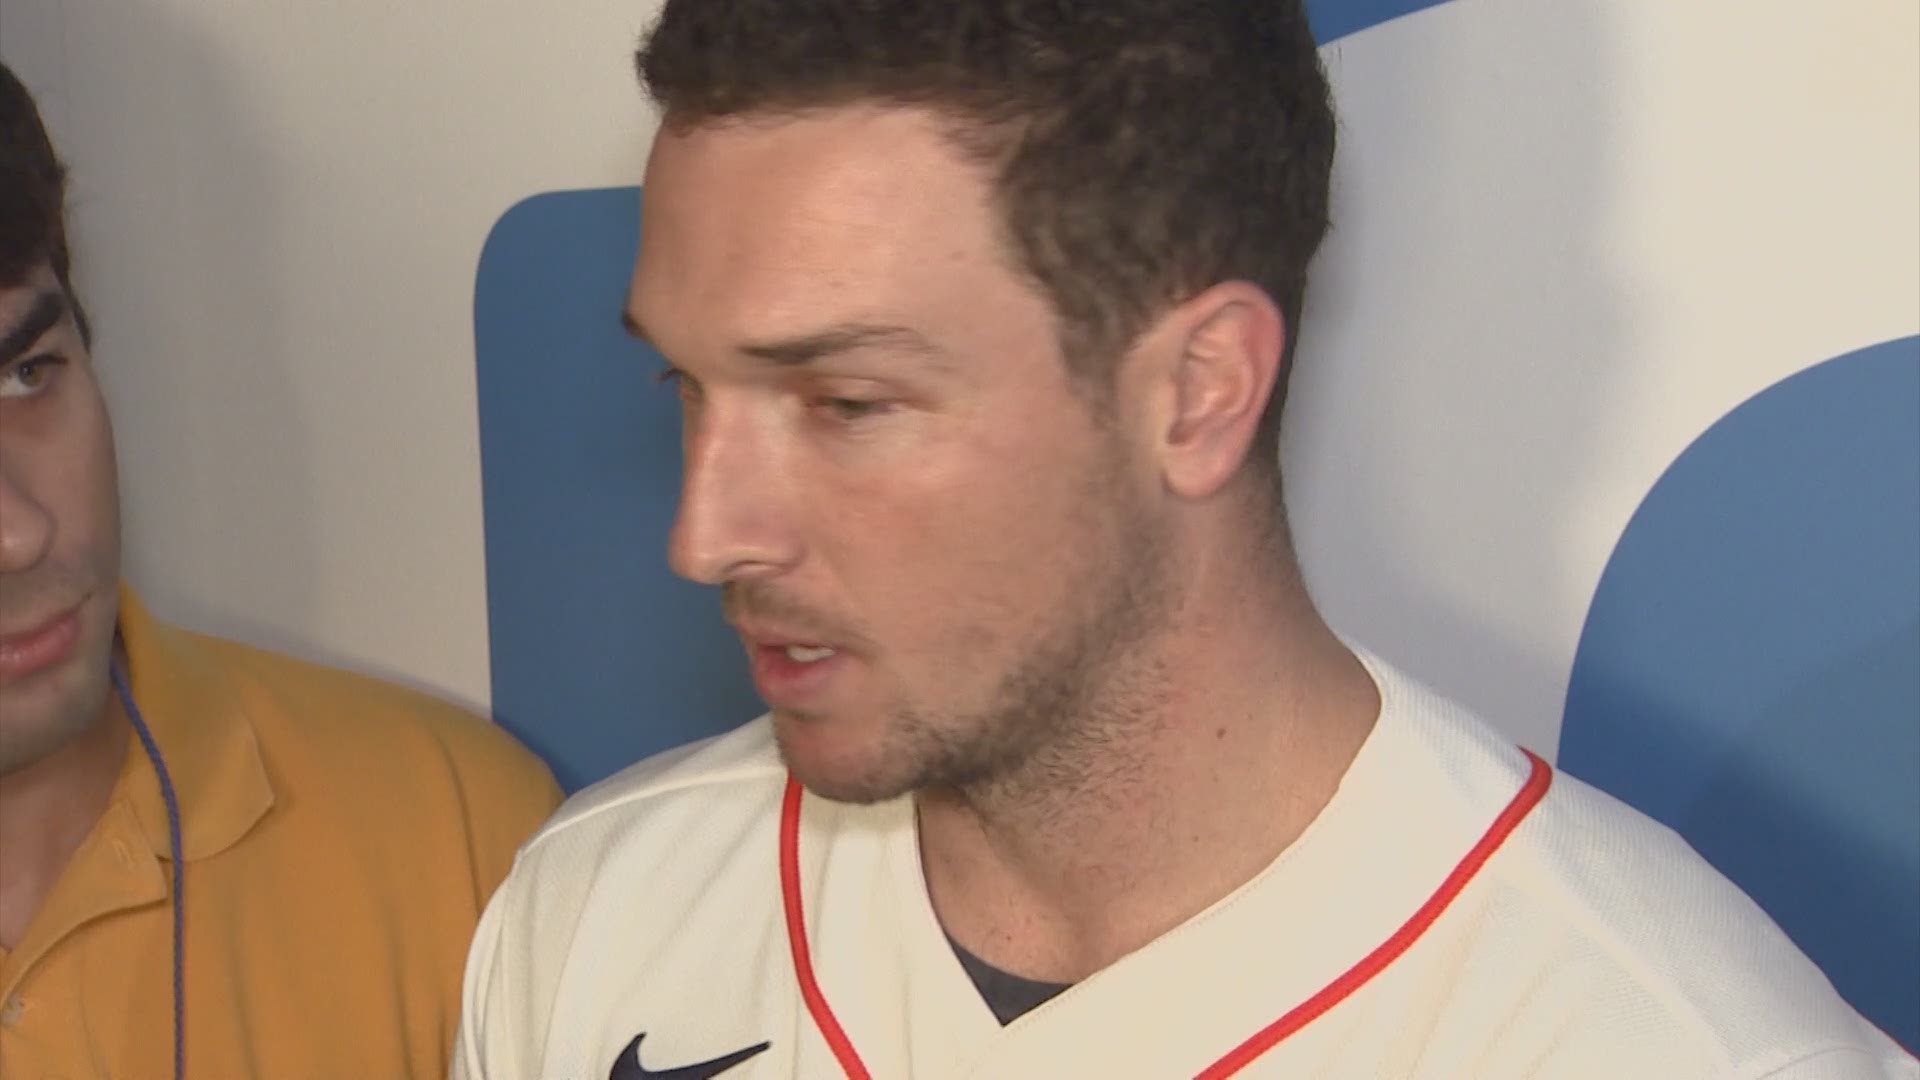 Houston Astros third baseman Alex Bregman addressed the MLB's report on the team's sign-stealing scandal during Fan Fest Saturday at Minute Maid Park.